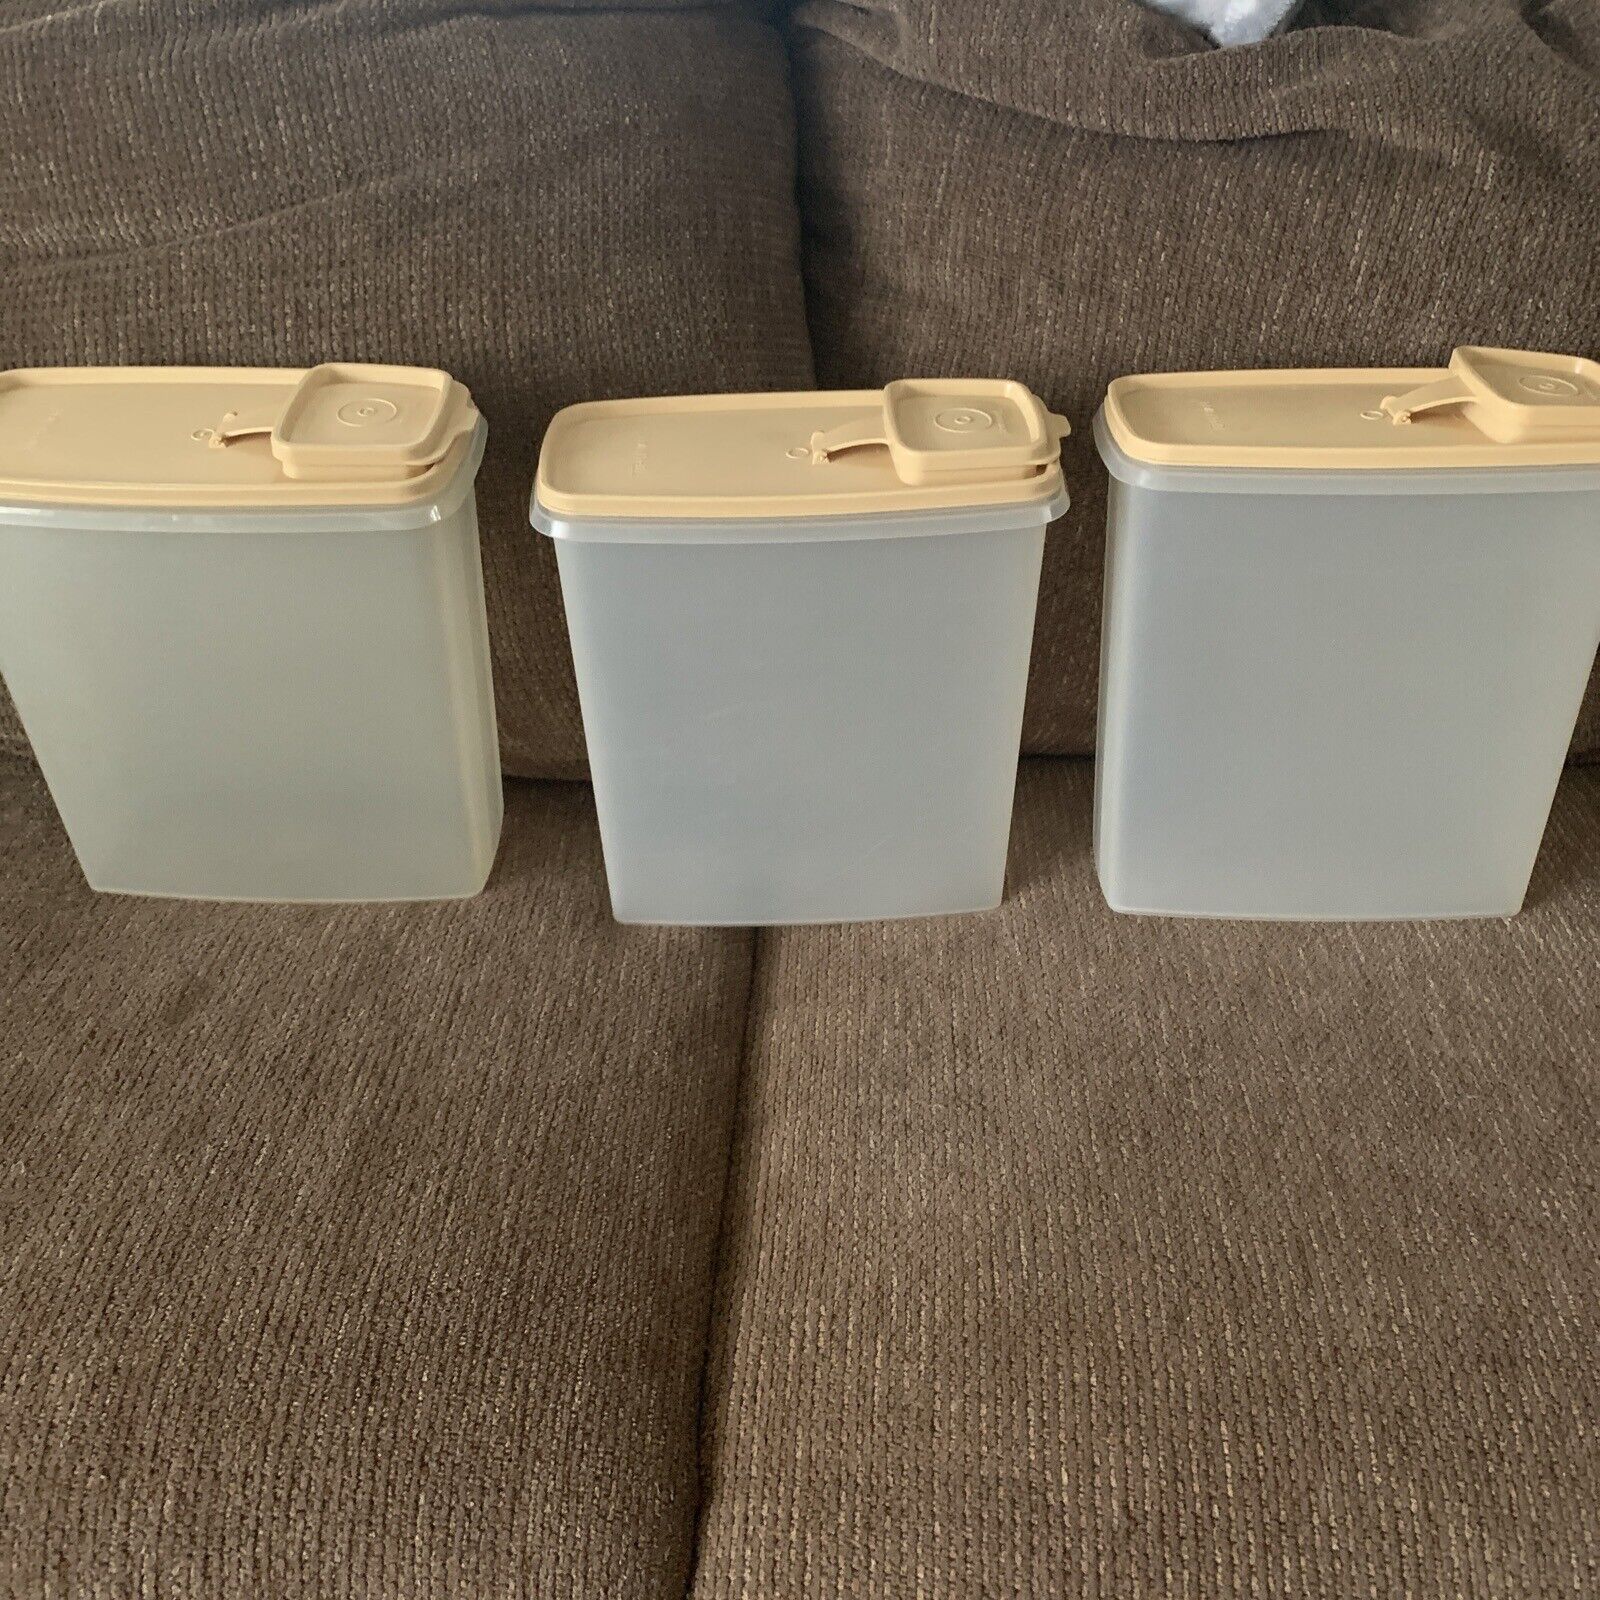 Tupperware Lot Of 3 Super Cereal 20 Cup Keepers 1588-8,1588-6,1588-5 Almond Lids